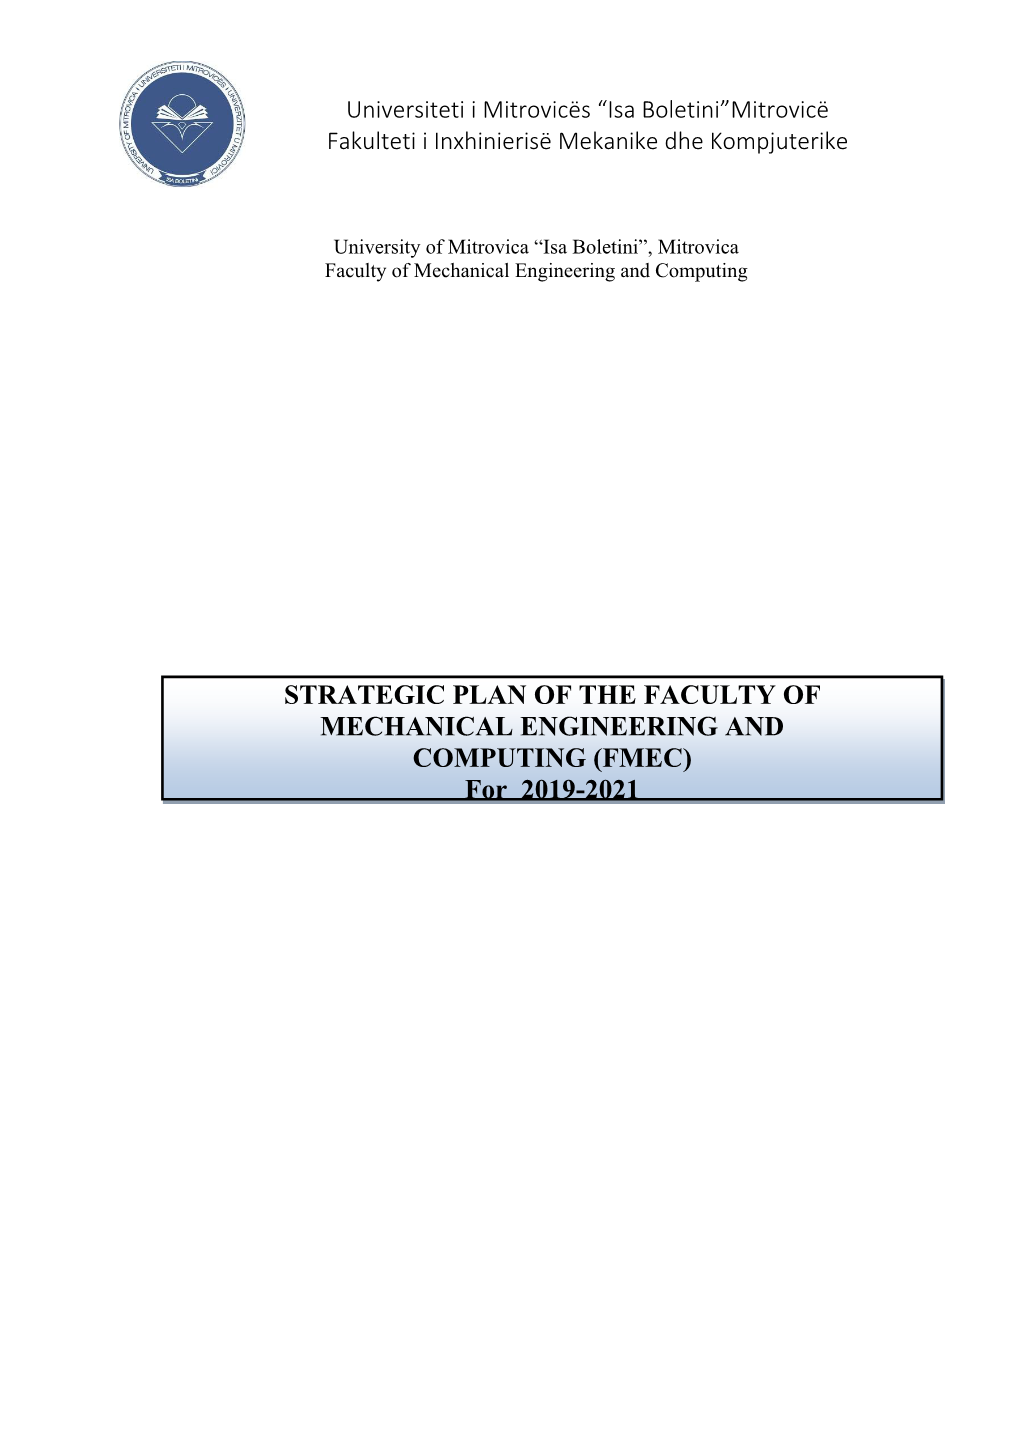 STRATEGIC PLAN of the FACULTY of MECHANICAL ENGINEERING and COMPUTING (FMEC) for 2019-2021